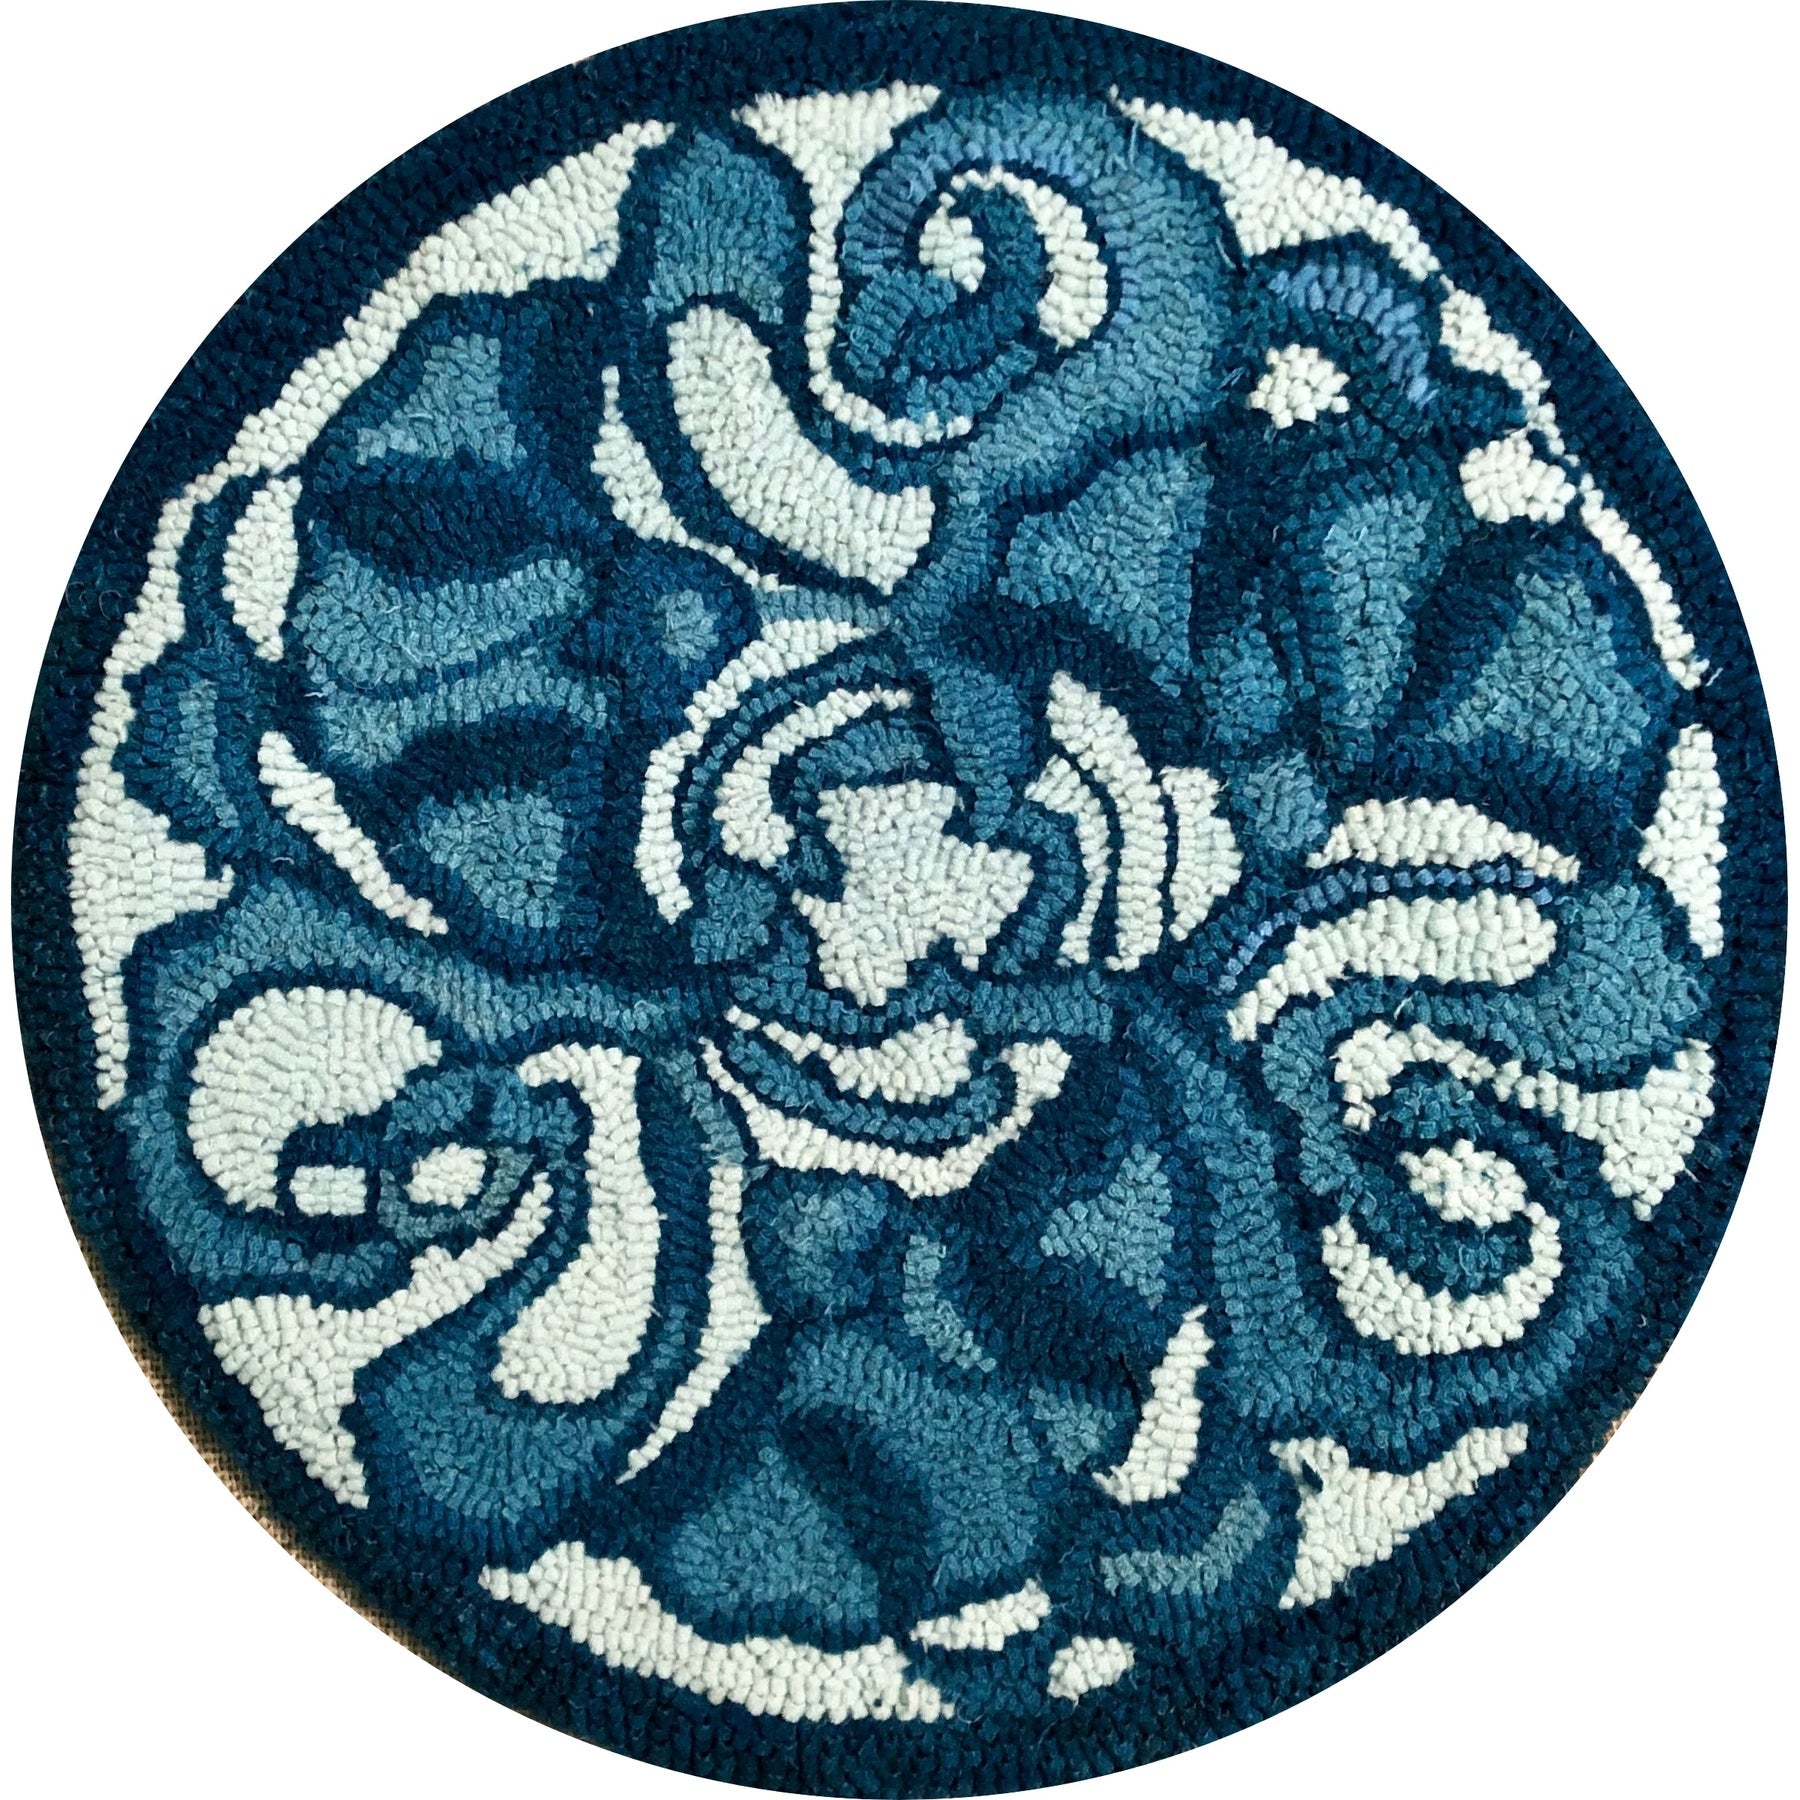 Accent Nouveau, rug hooked by Vicki Rudolph